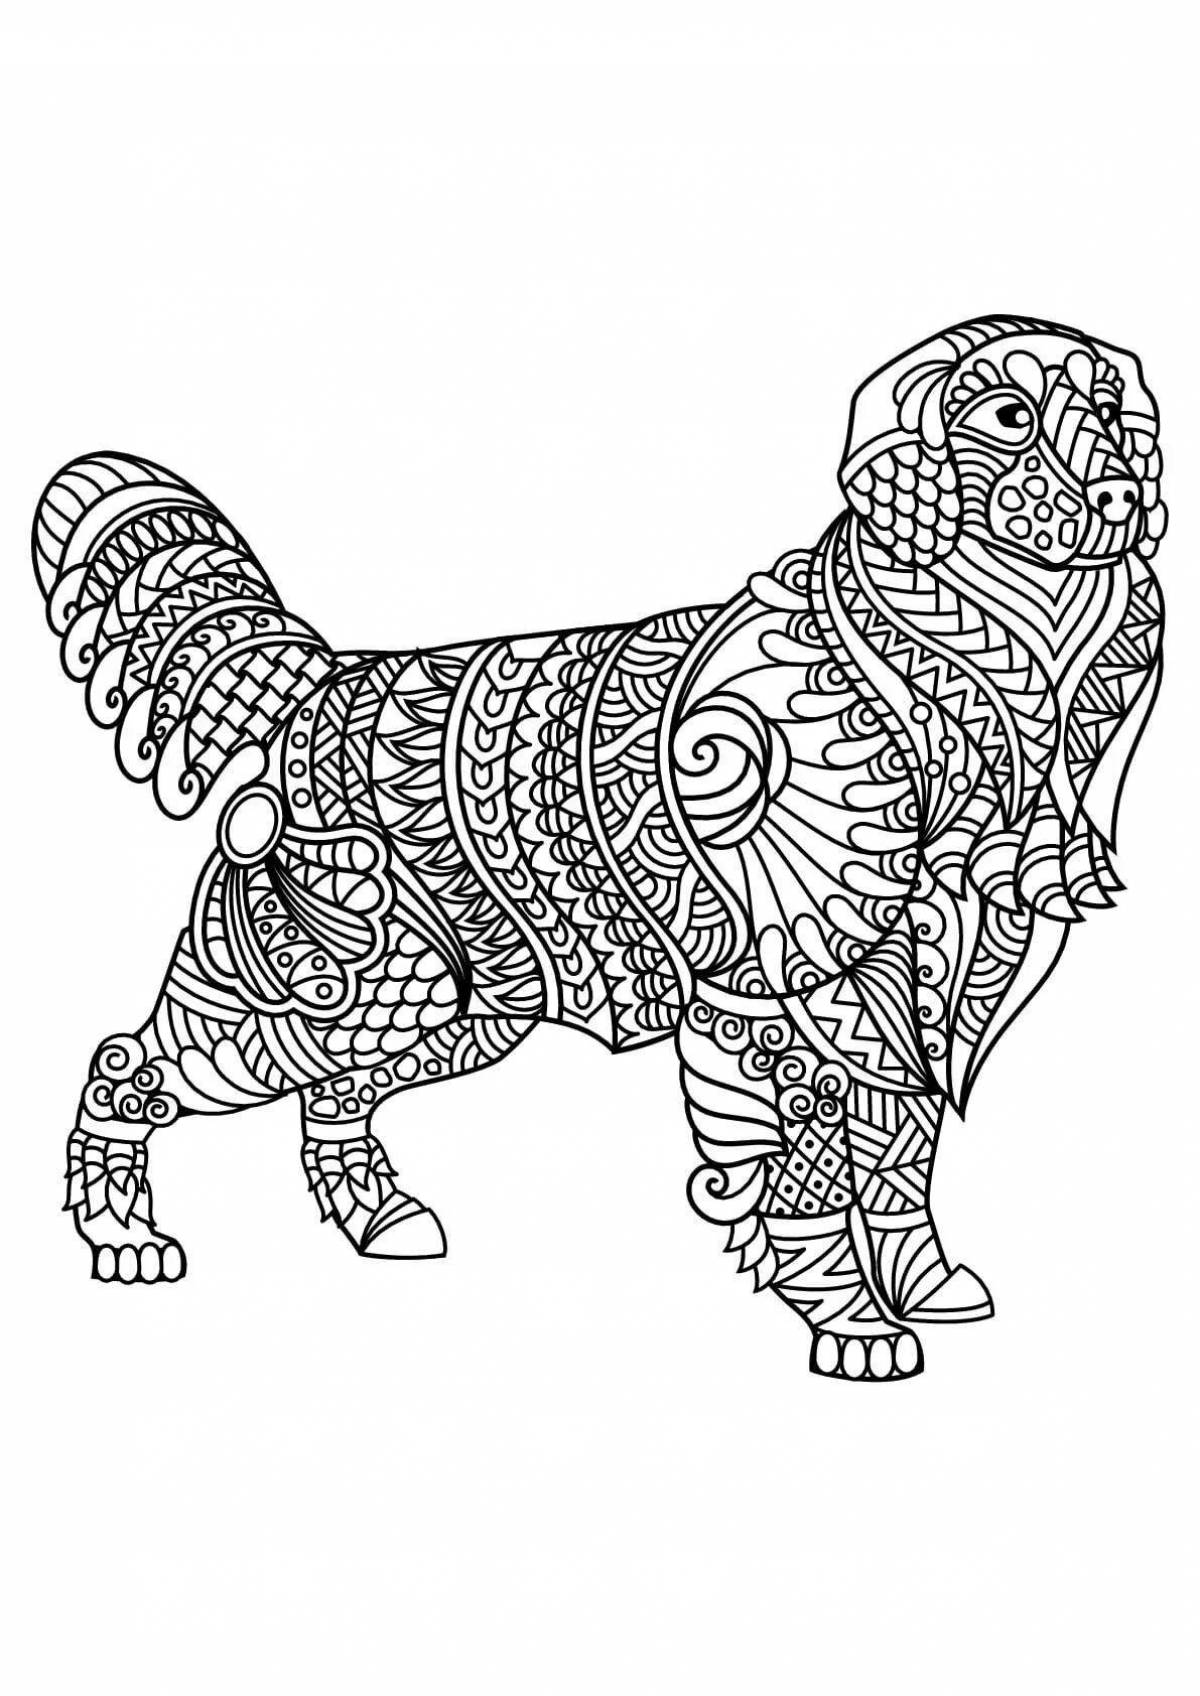 Joyful coloring of animals with a pattern